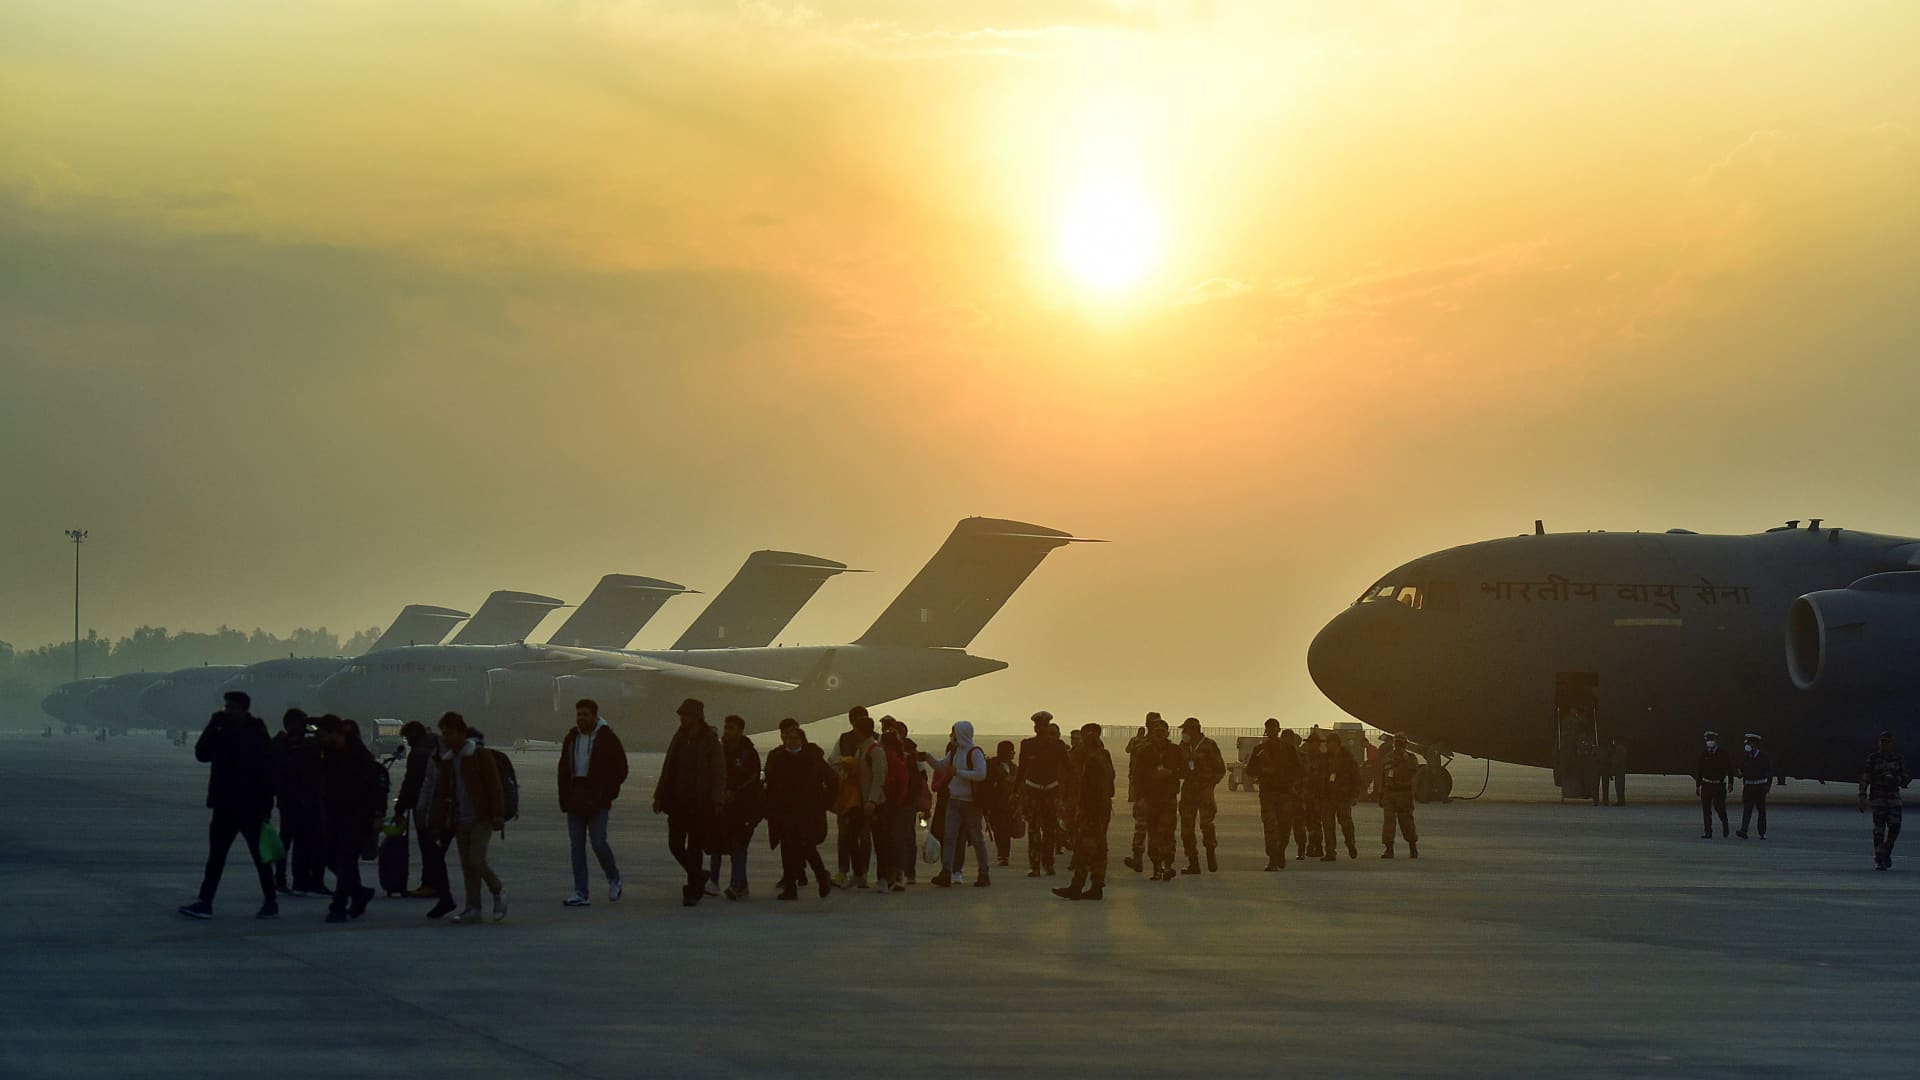 Indian Air forceaircraft, C-17 Globemaster, brings a batch of 200 stranded Indian students in Ukraine, at Hindon Air Force Station, on March 3, 2022 in New Delhi, India. 